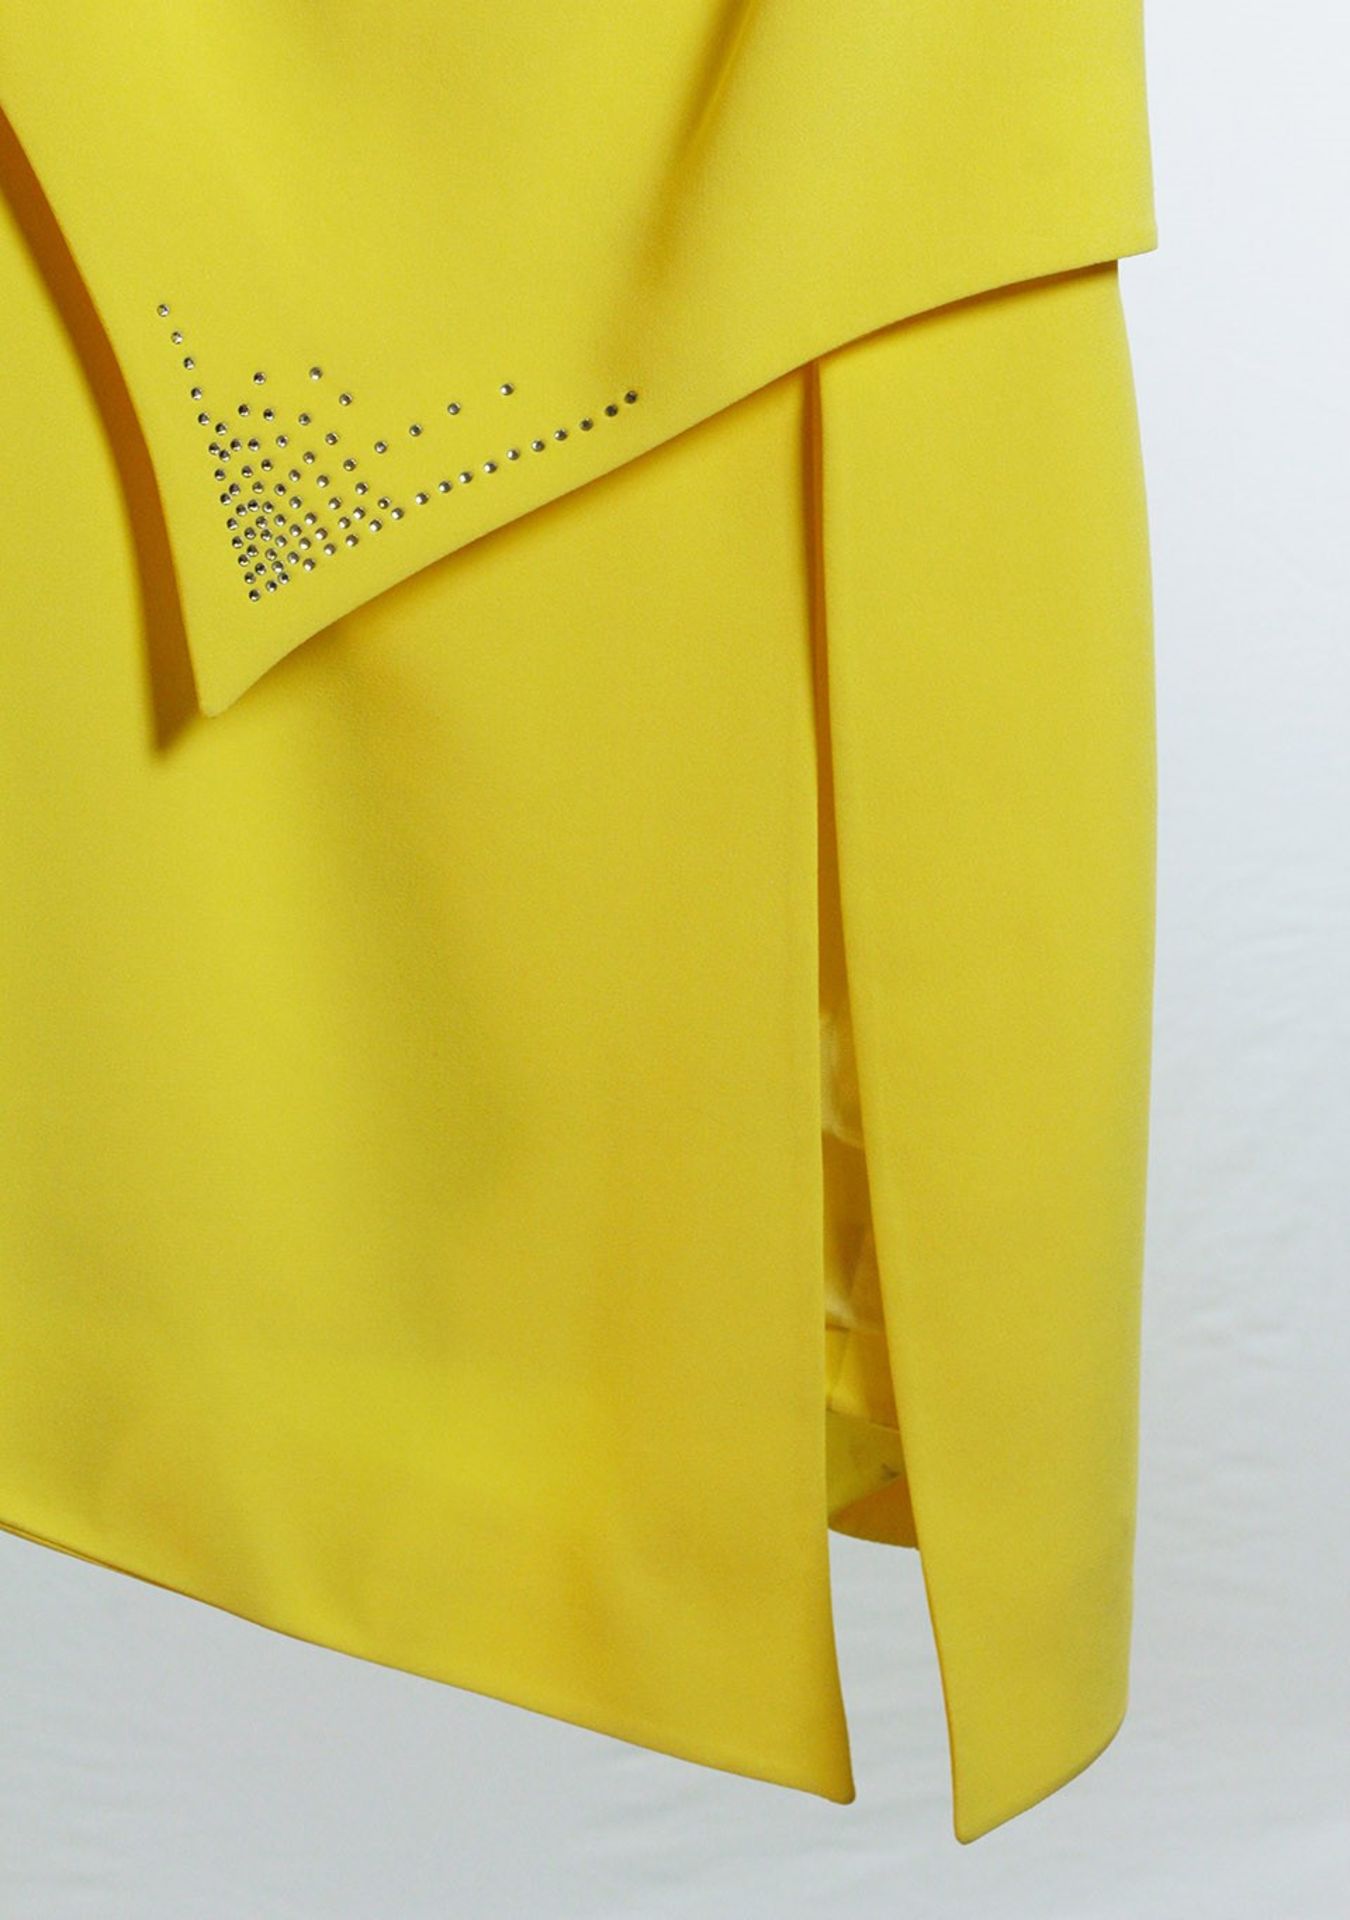 1 x Boutique Le Duc Yellow Dress - Size: 12 - Material: 68% Acetate, 32% Viscose - From a High End - Image 7 of 14